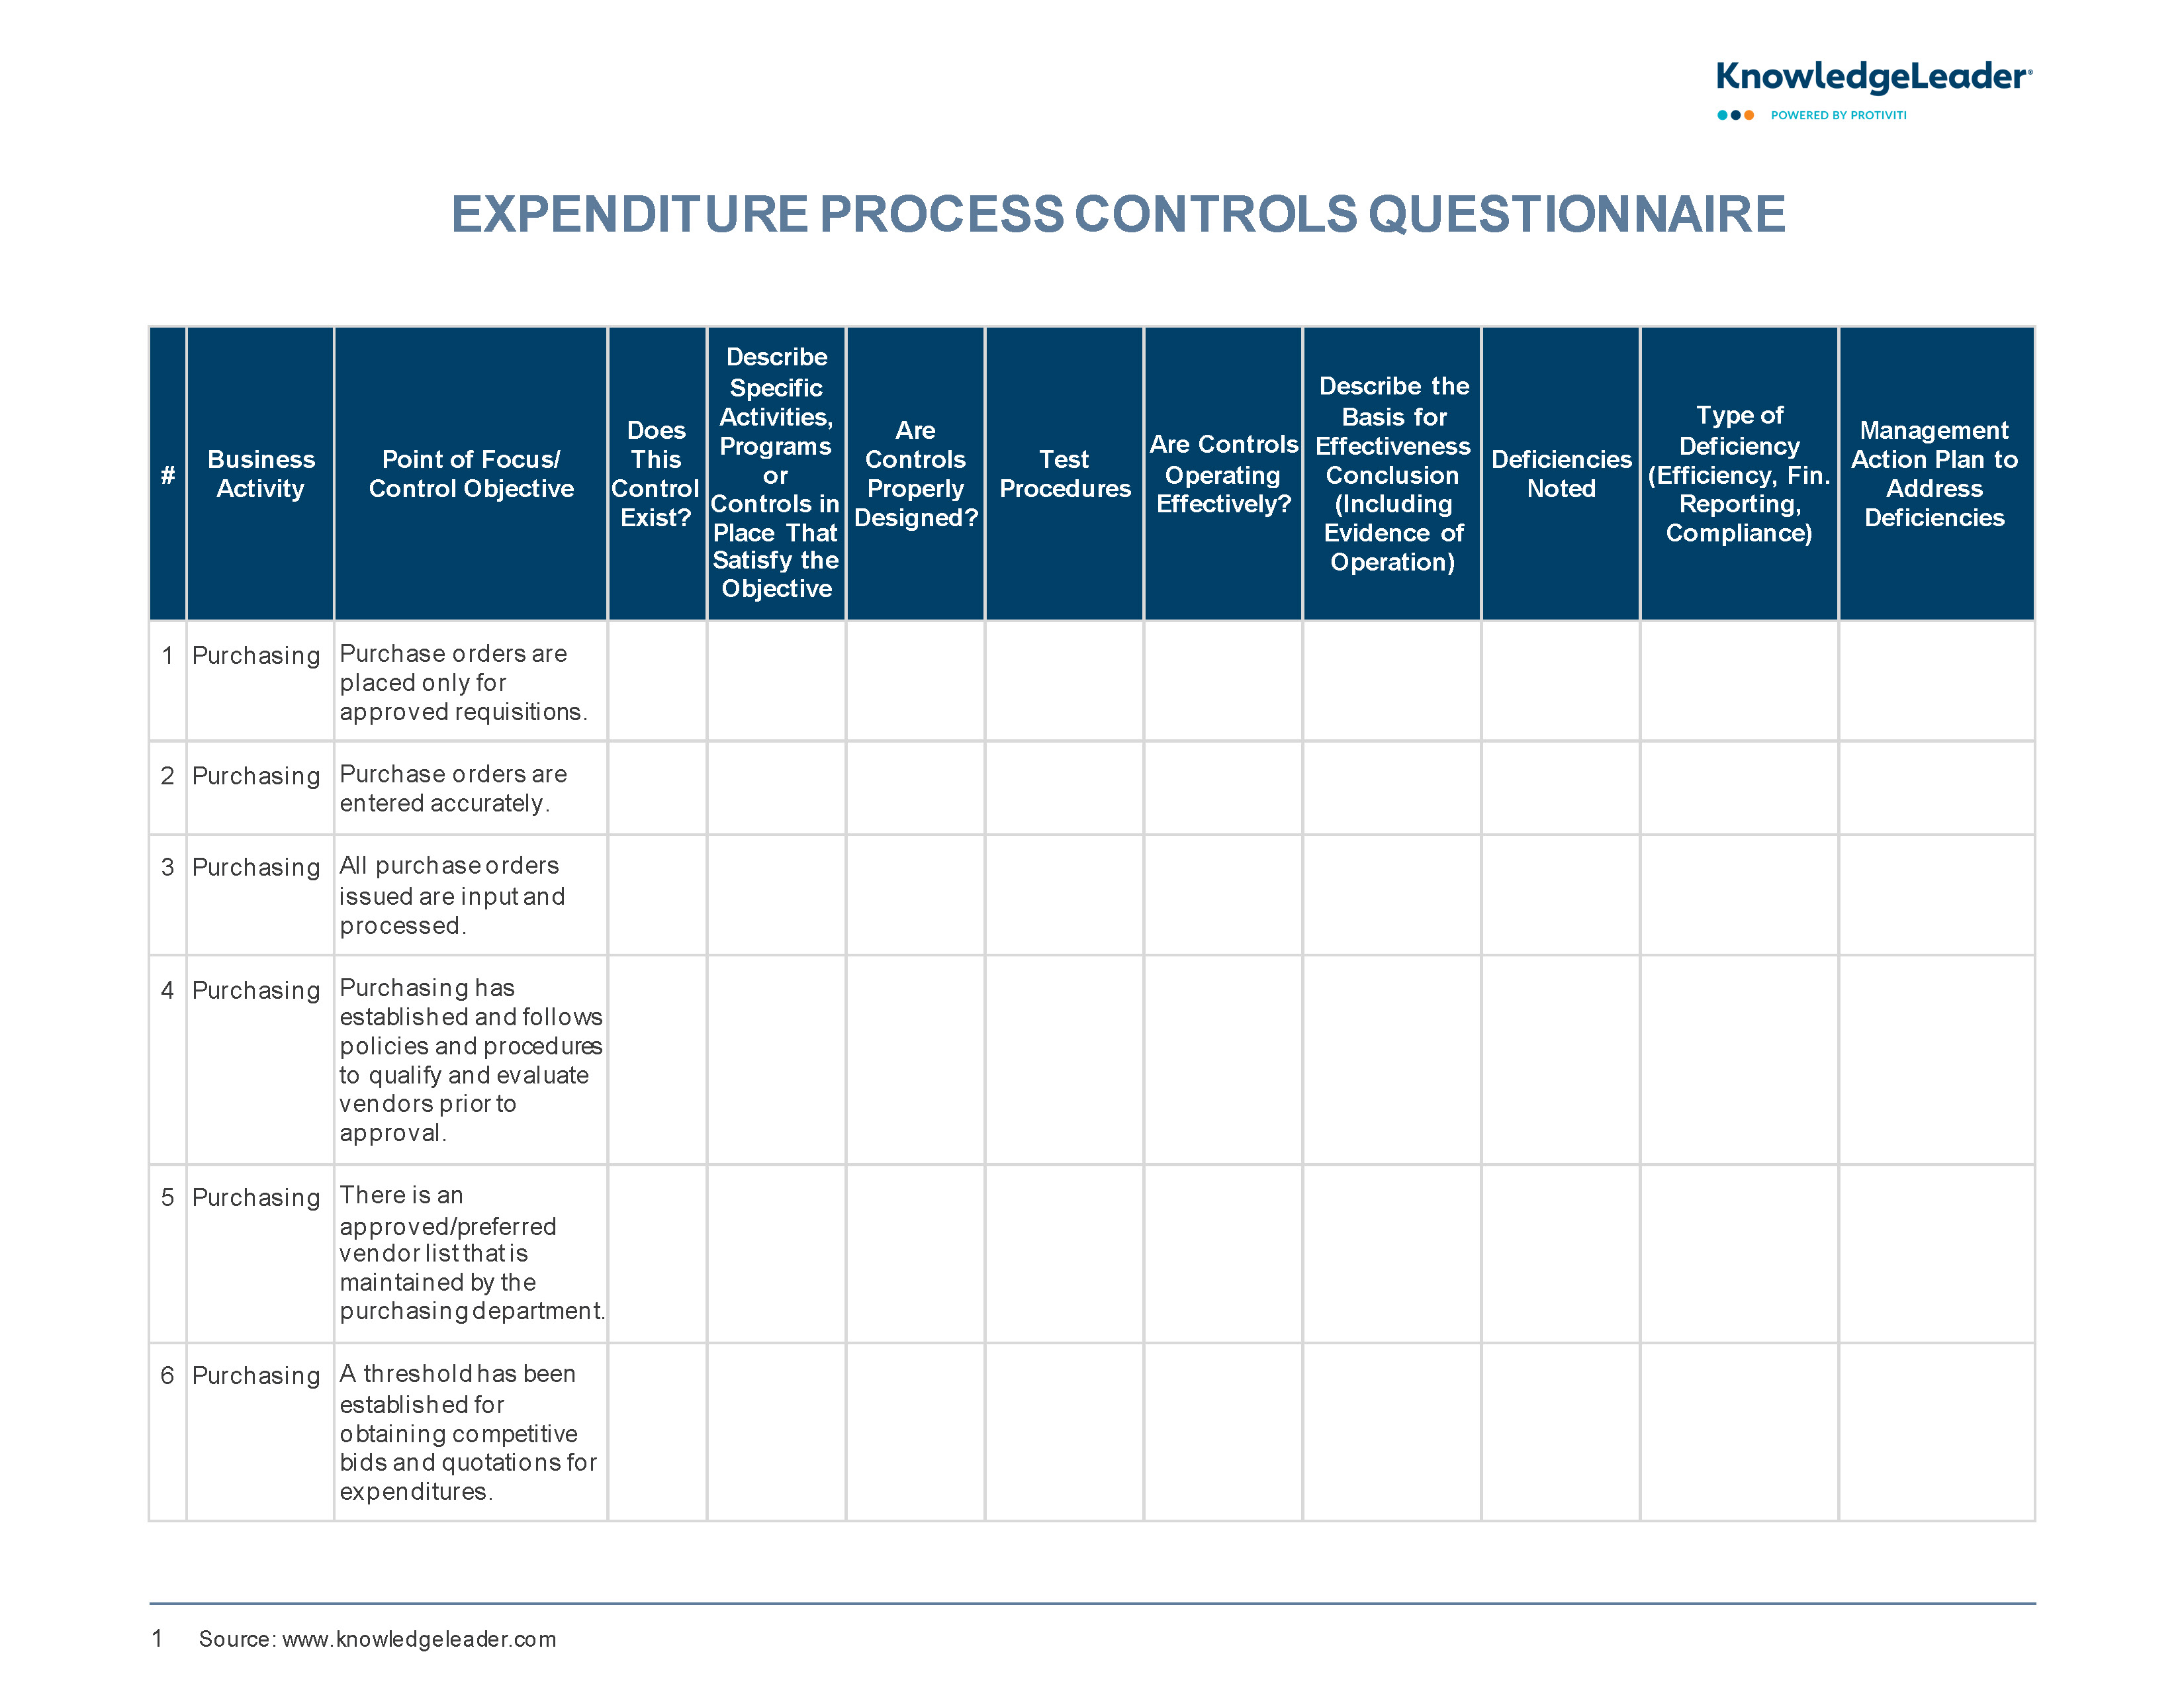 Screenshot of the first page of Expenditure Process Control Questionnaire